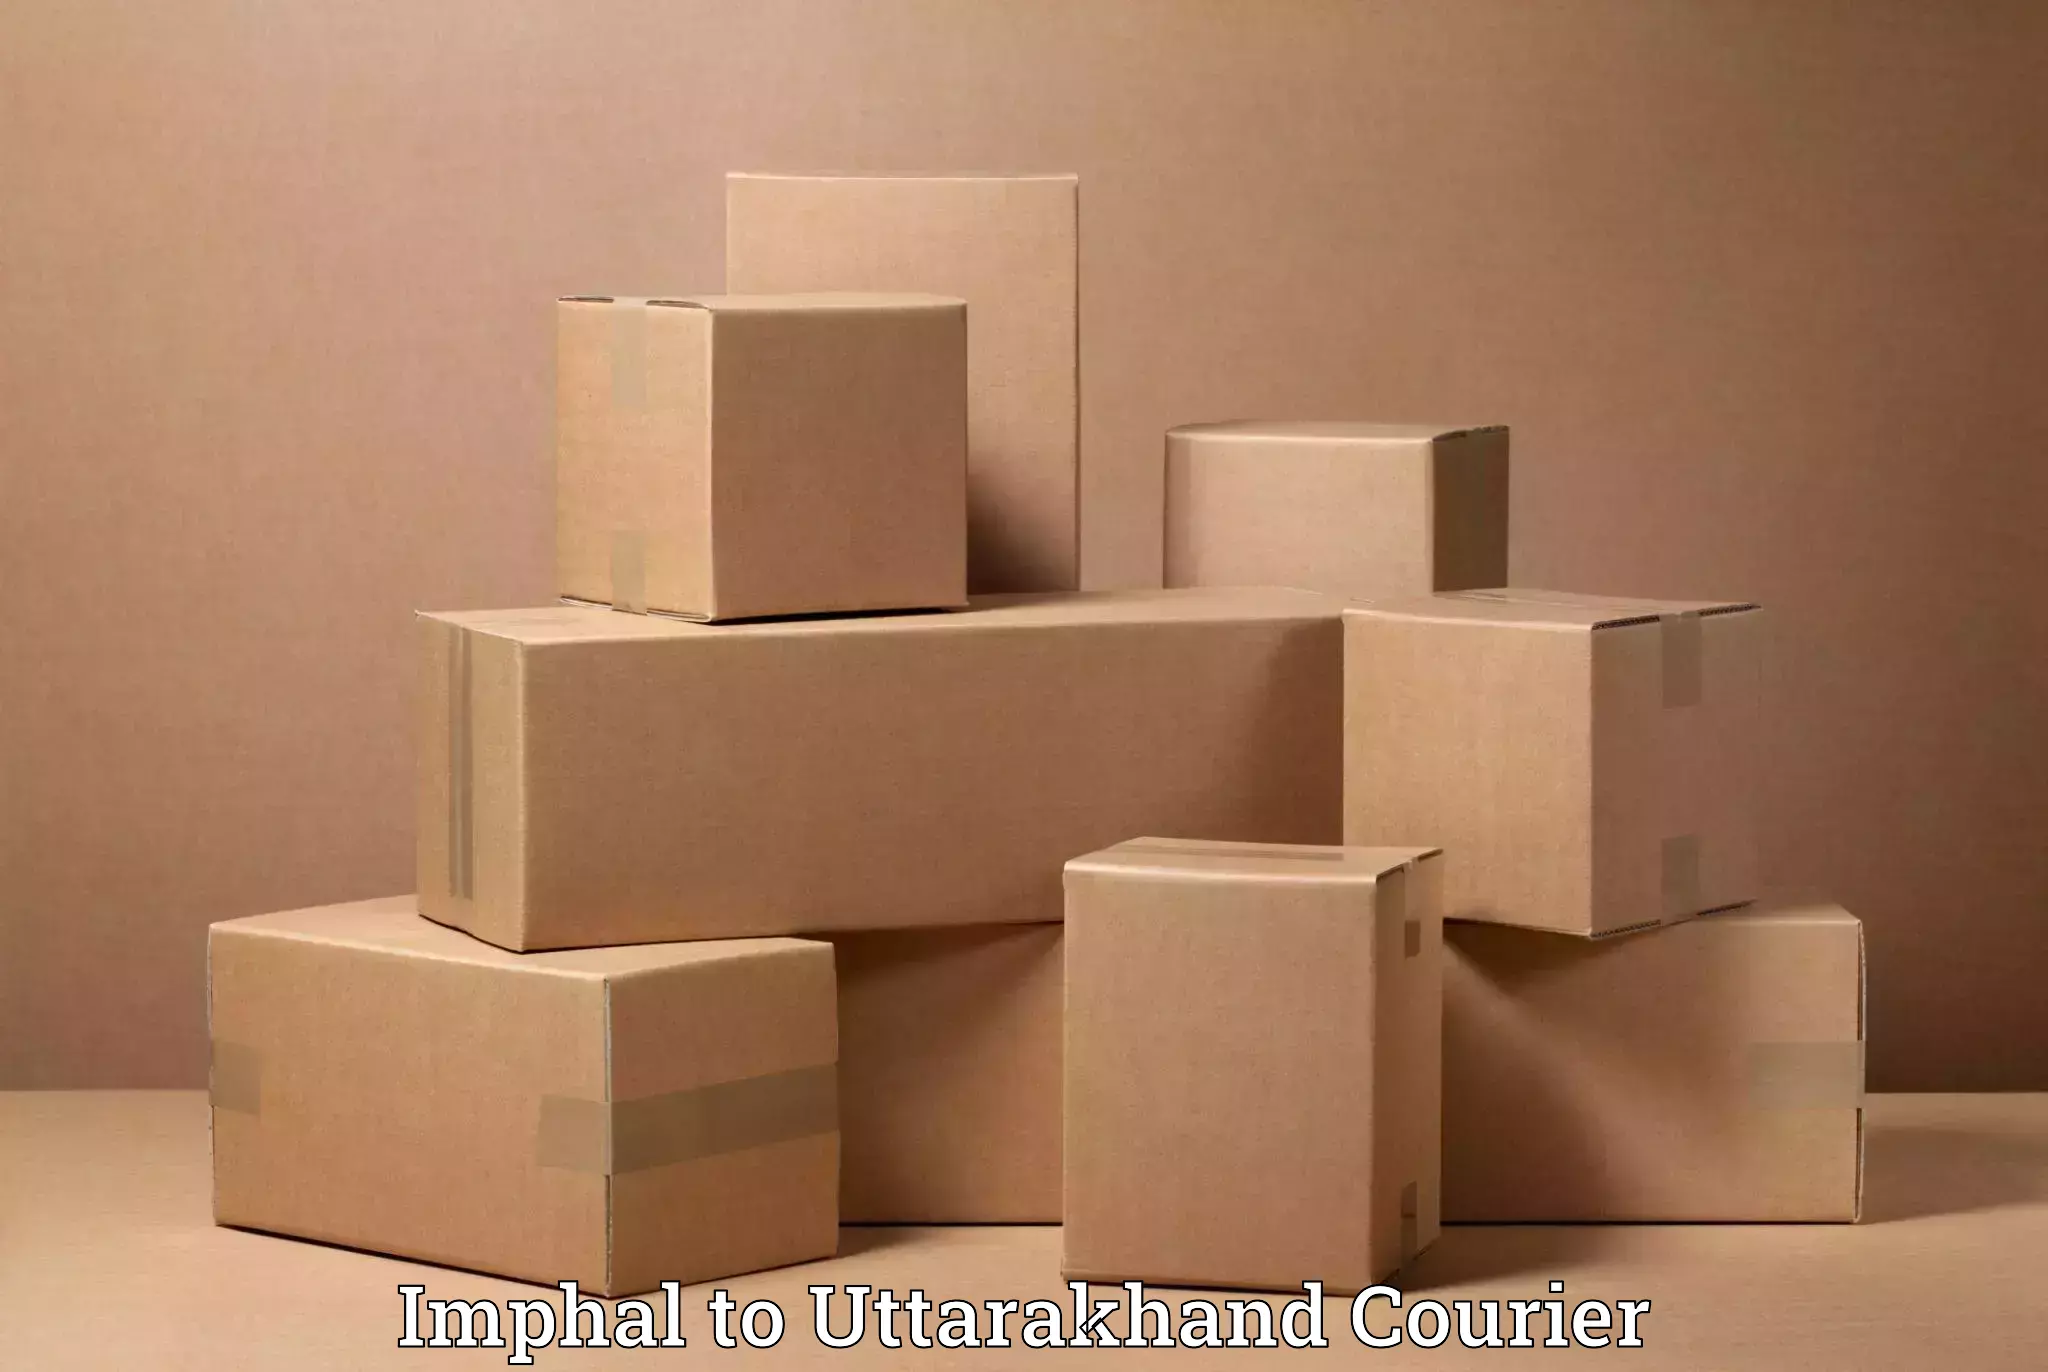 Efficient moving company Imphal to Kashipur